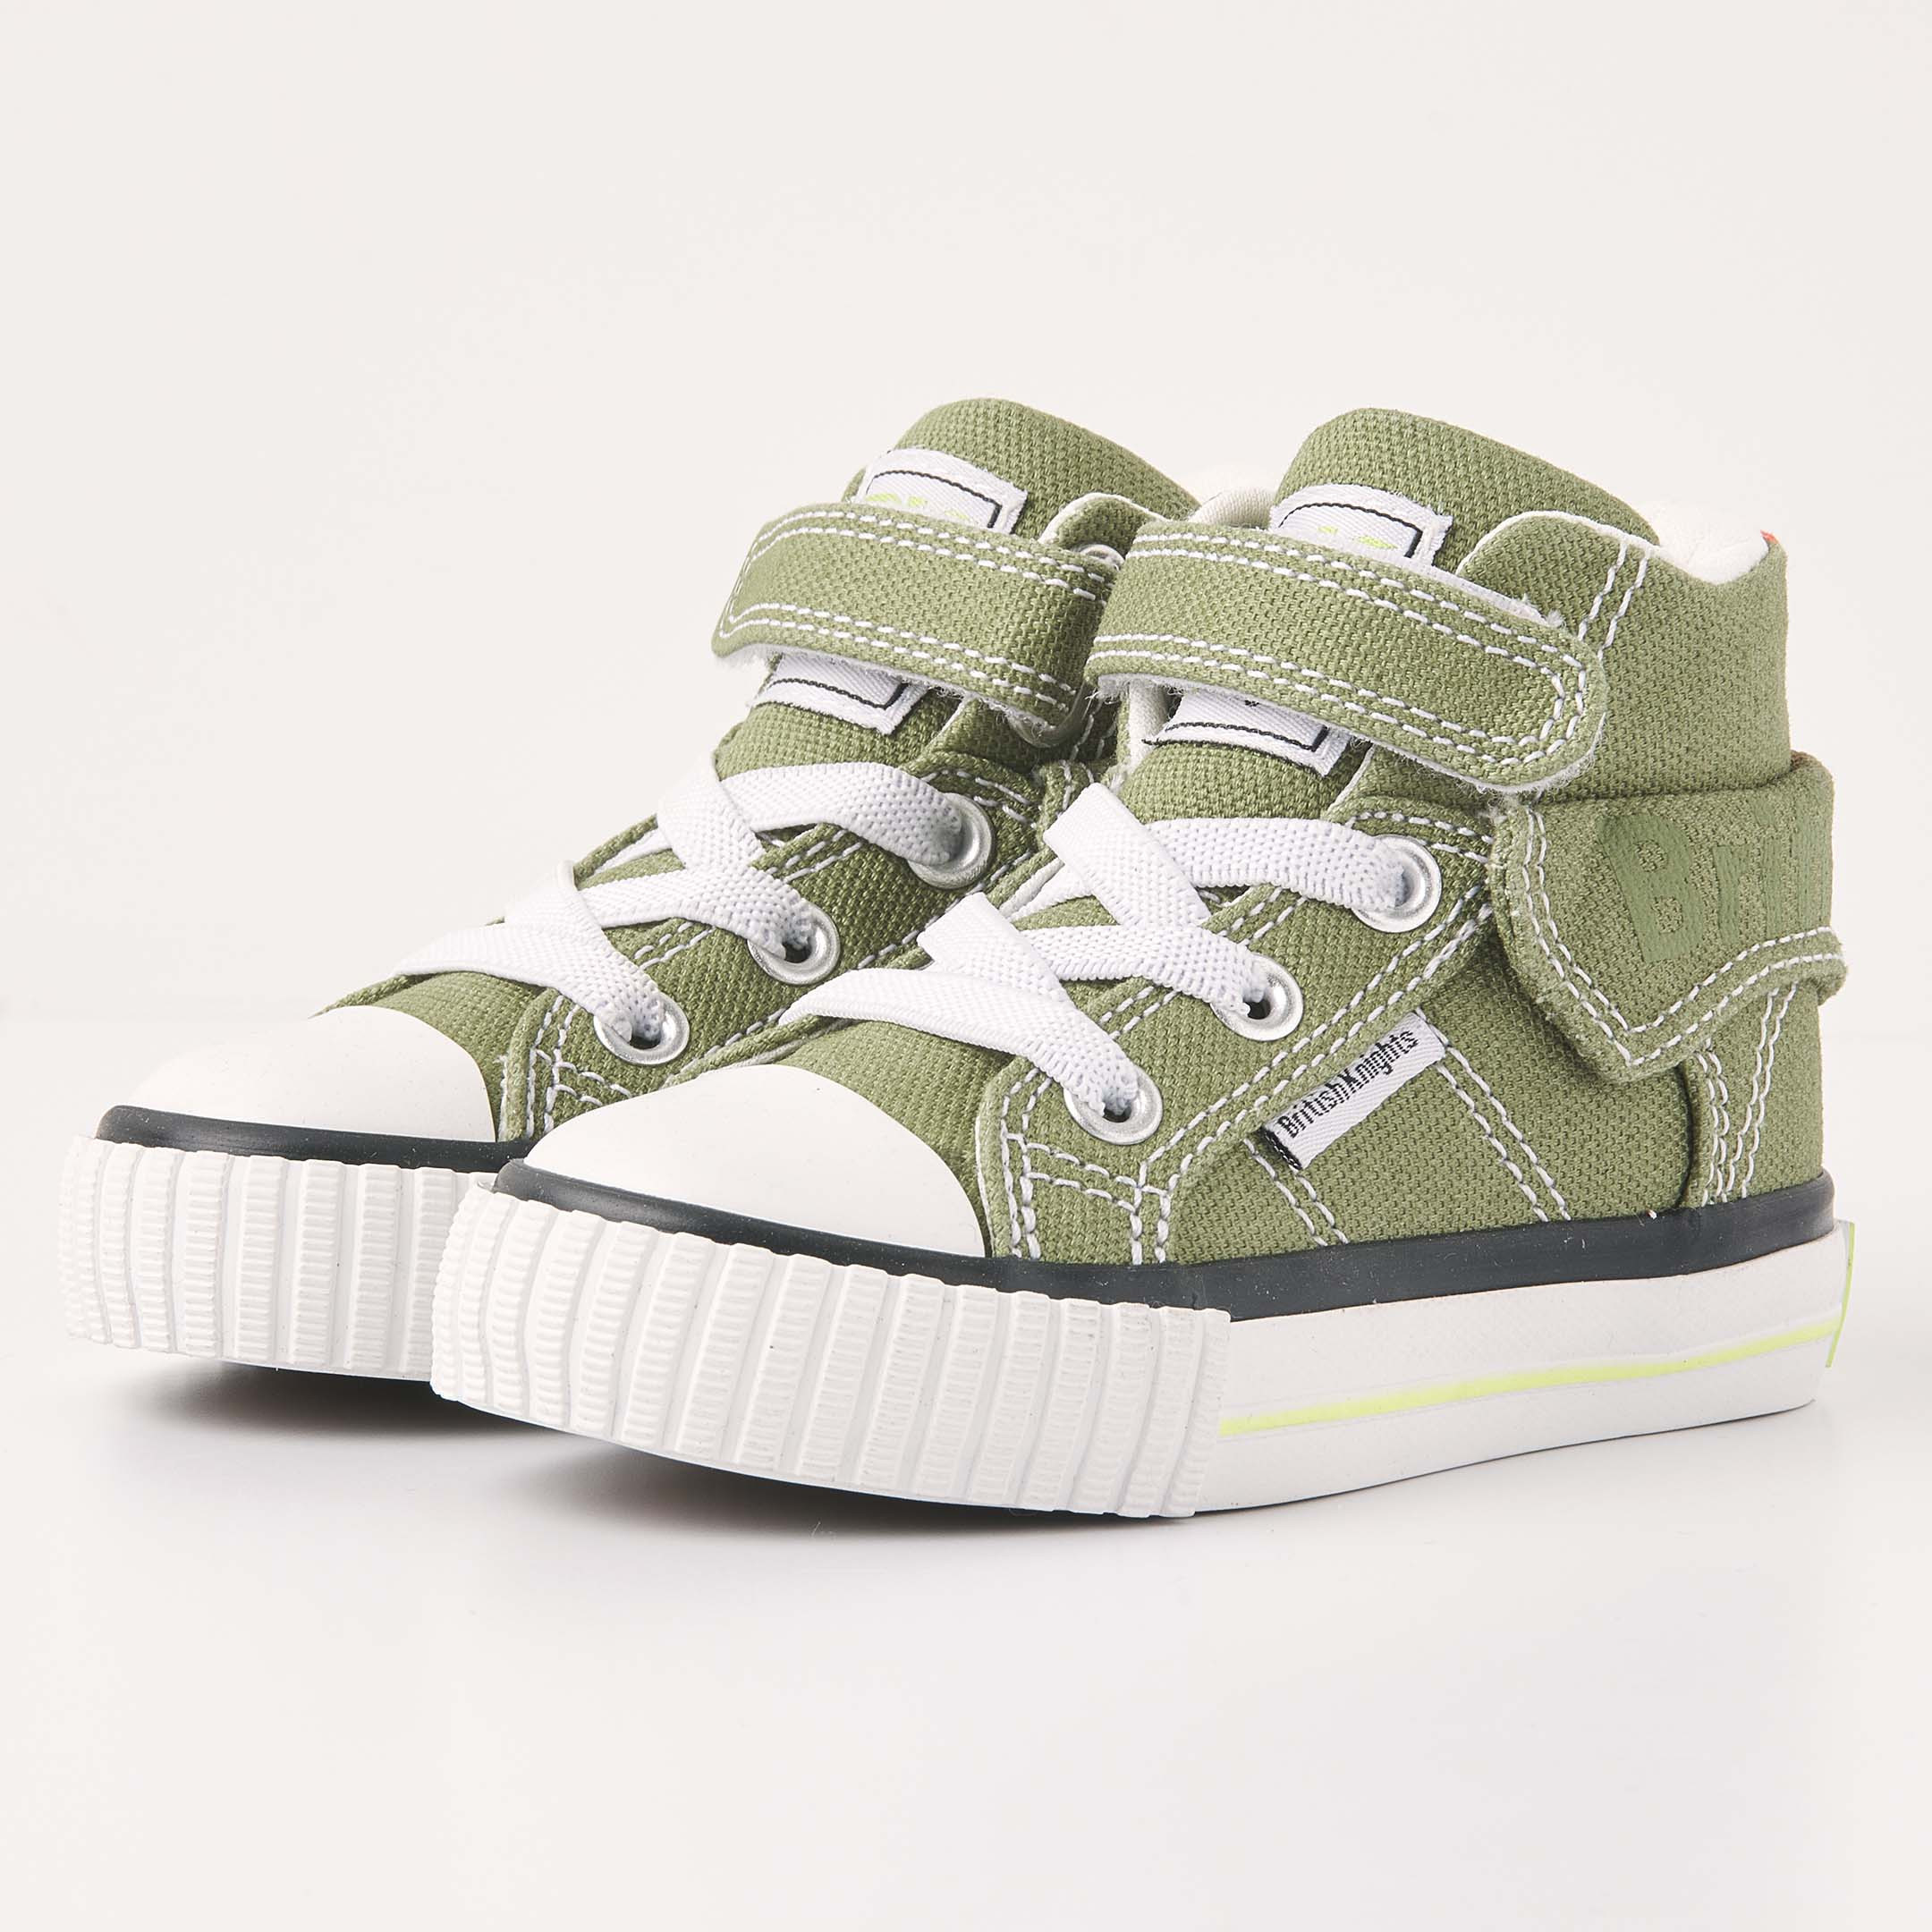 British Knights Sneaker Front view  B51-3742I-03 ROCO HIGH-TOP MALE